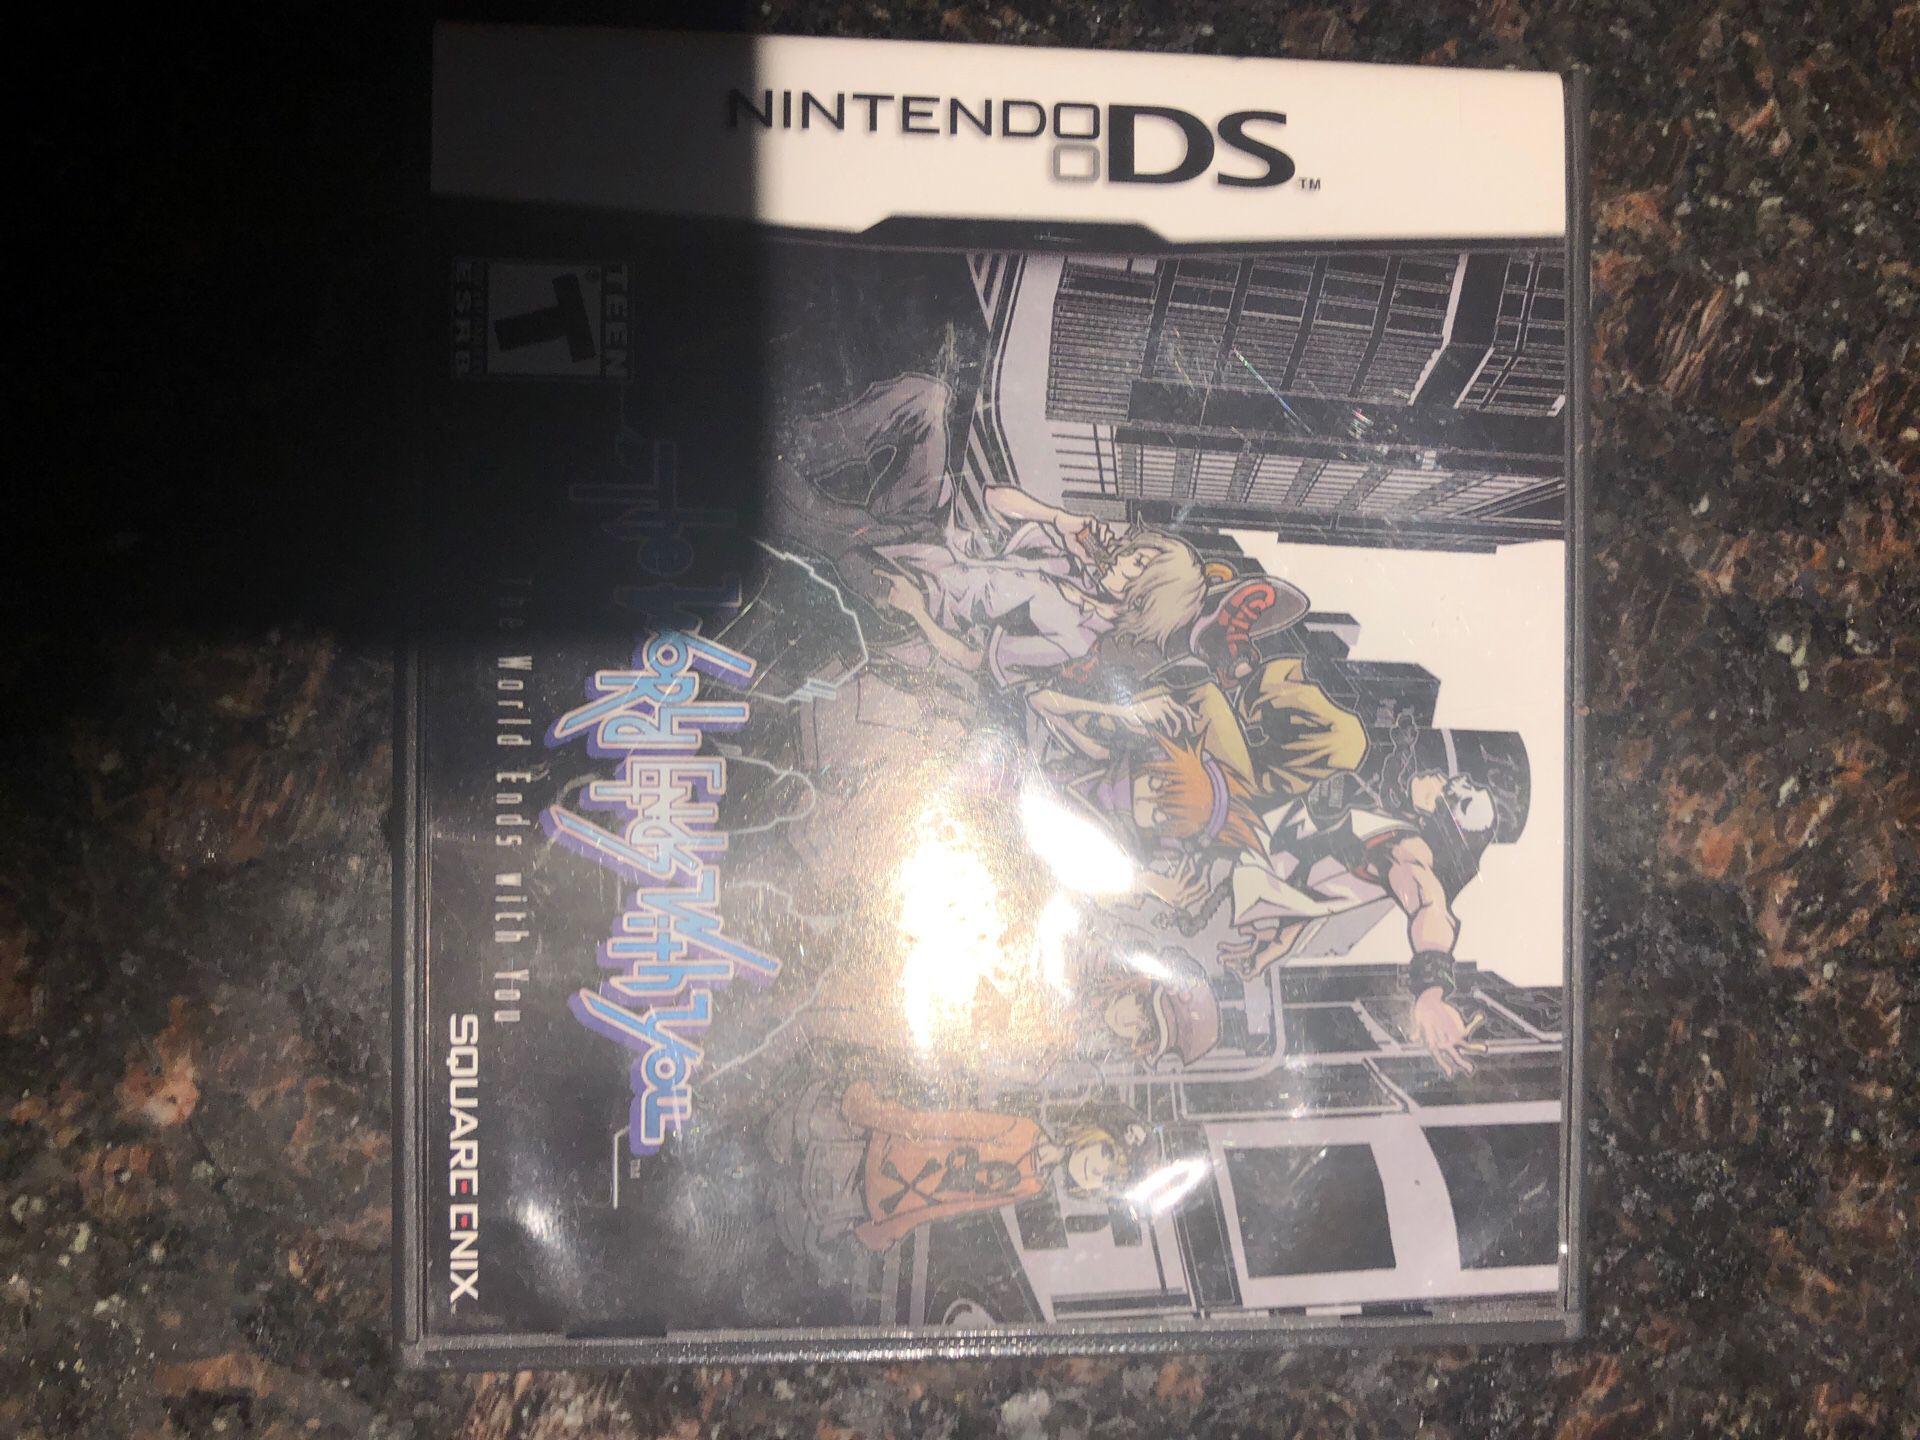 Two copies of kingdom hearts for Nintendo DS